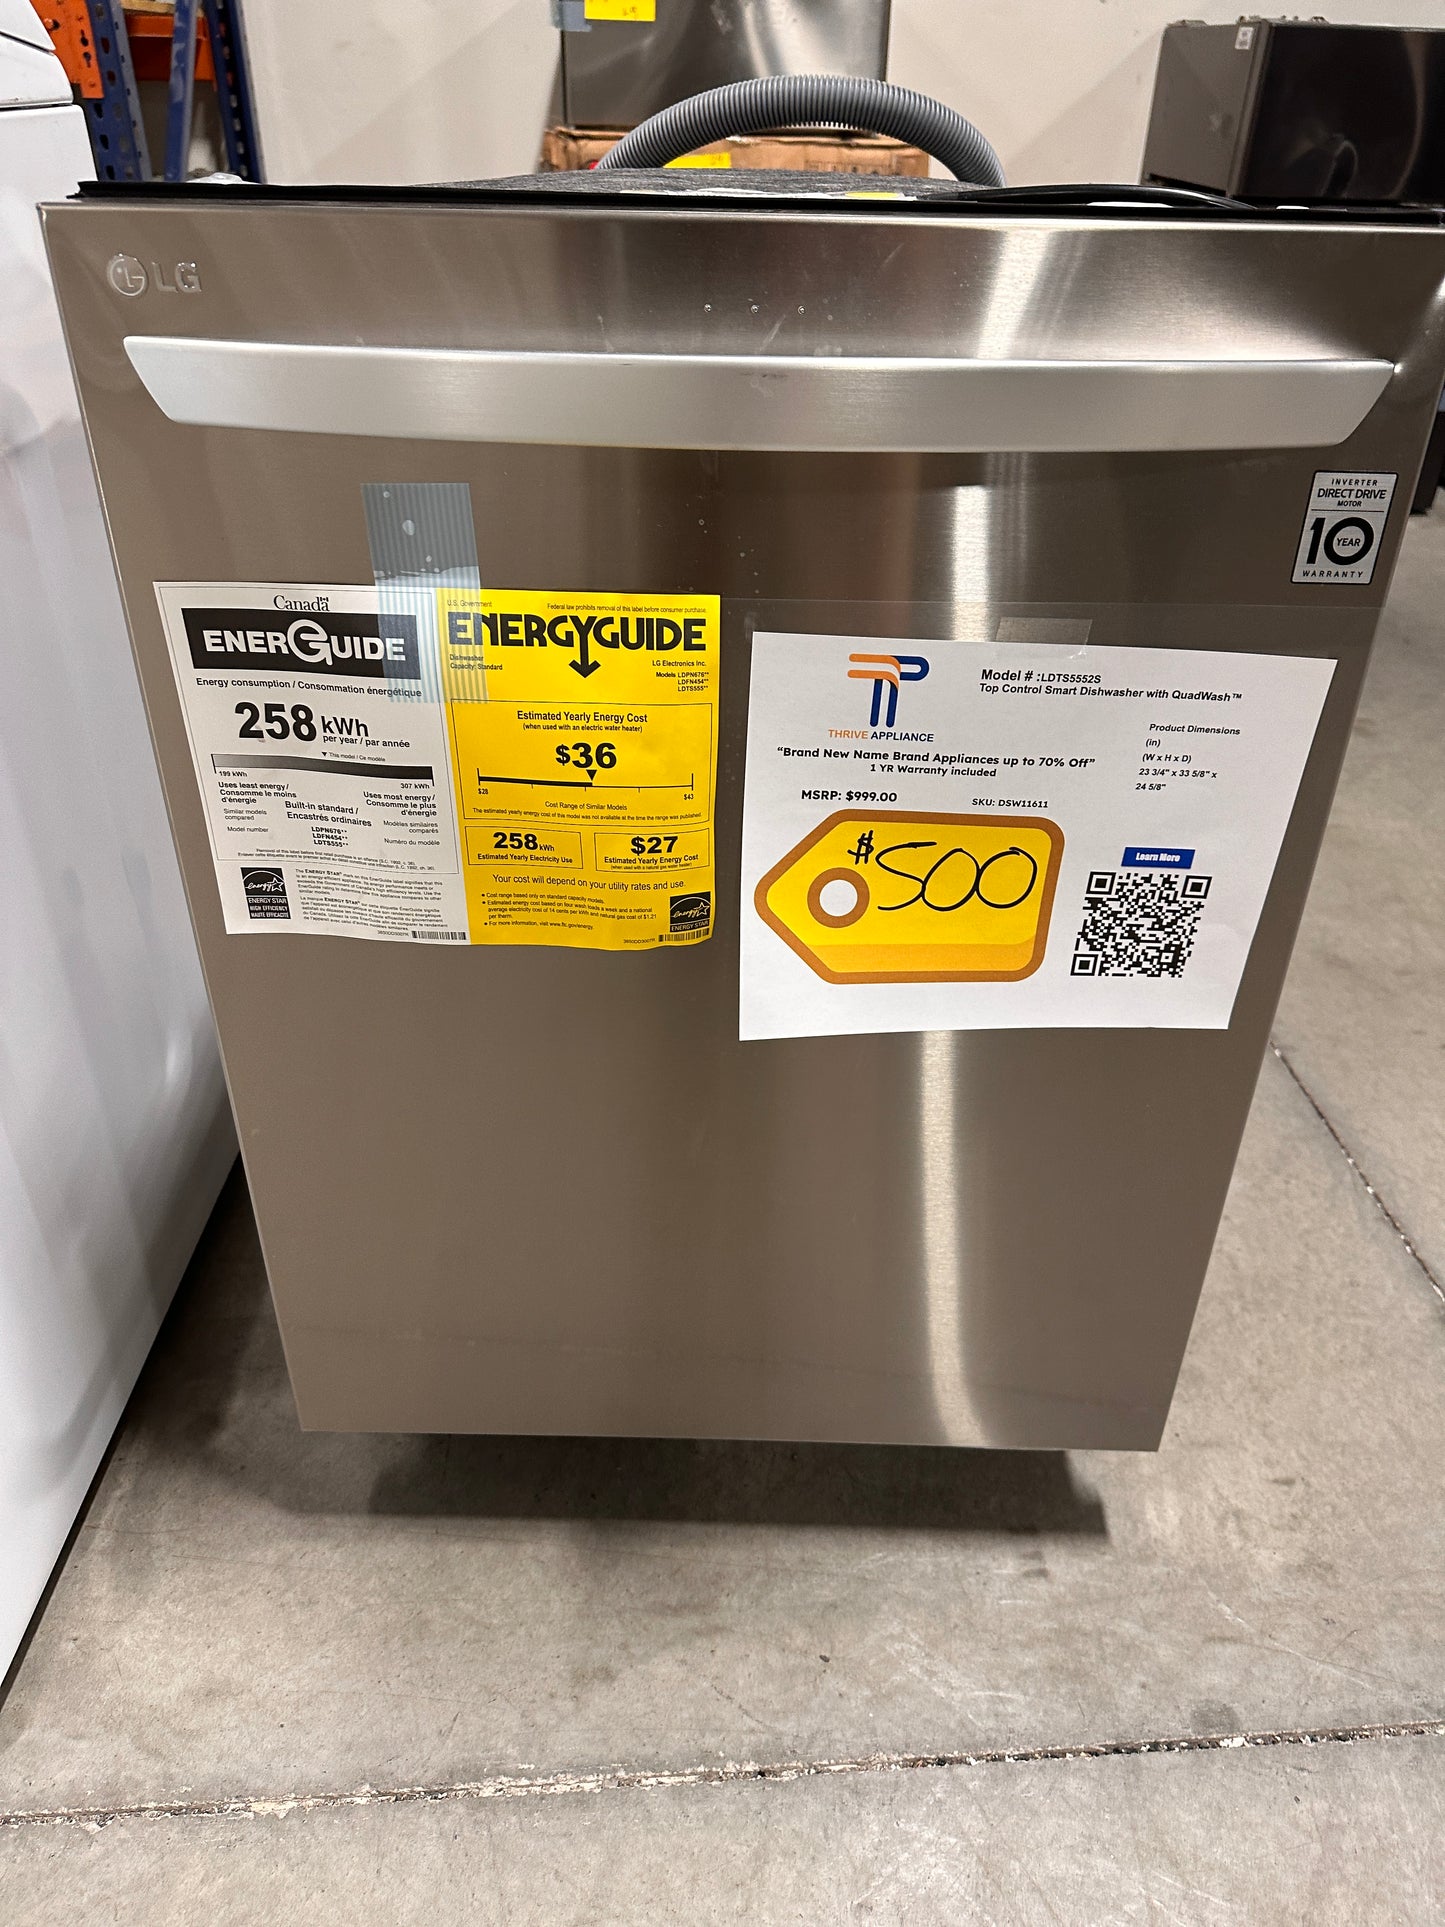 NEW LG STAINLESS STEEL TUB DISHWASHER Model:LDTS5552S  DSW11611